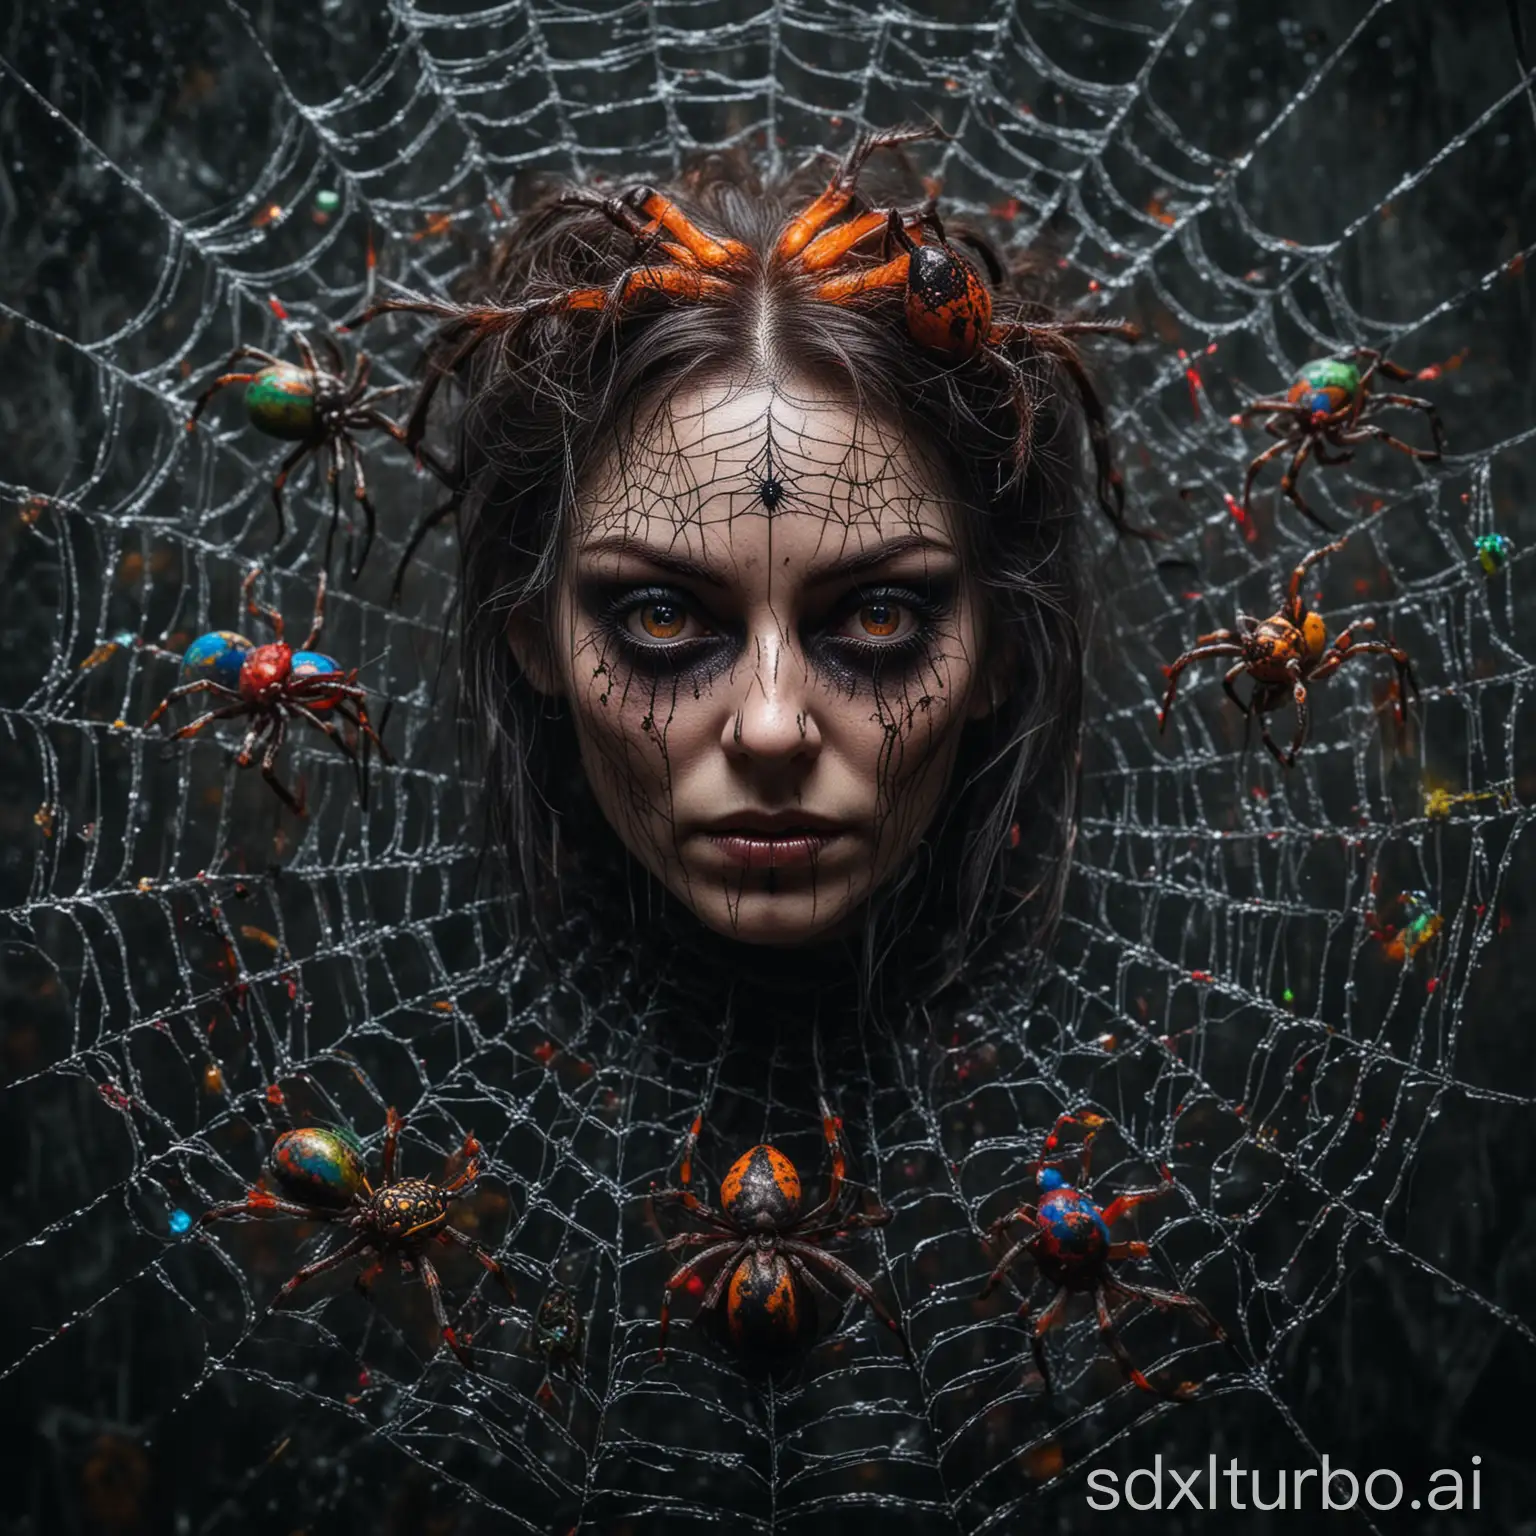 Top view, hybrid of a horrific blending of a demonic woman with a colorful spider’s head resting in a spider’s web with tiny spiders running around. Spooky. Alluring and grotesque.